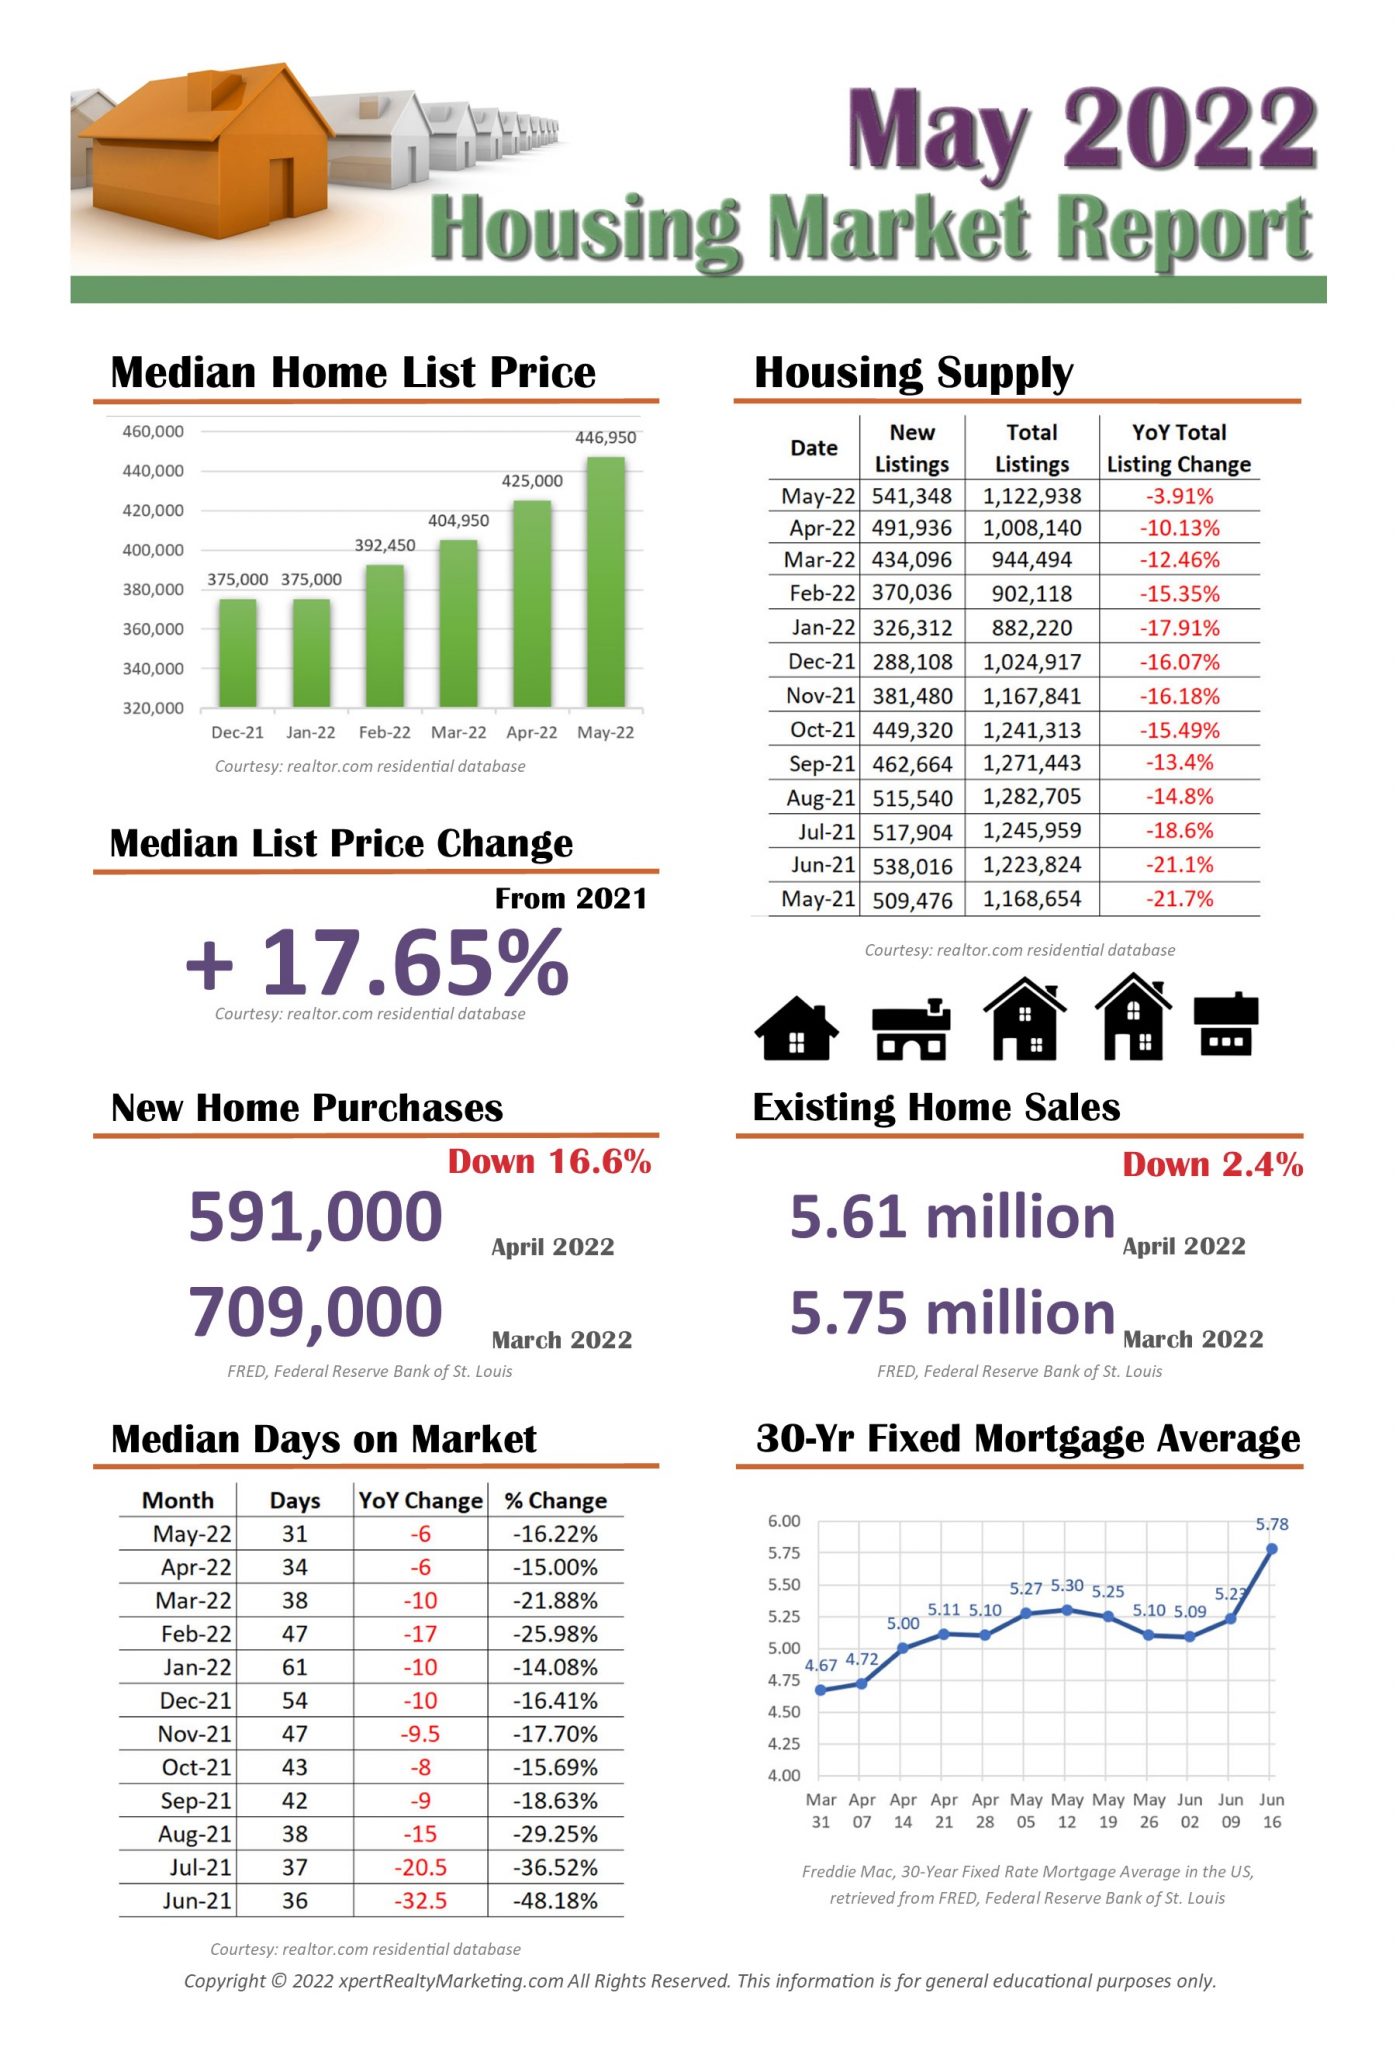 Market Report Infographic May 2022